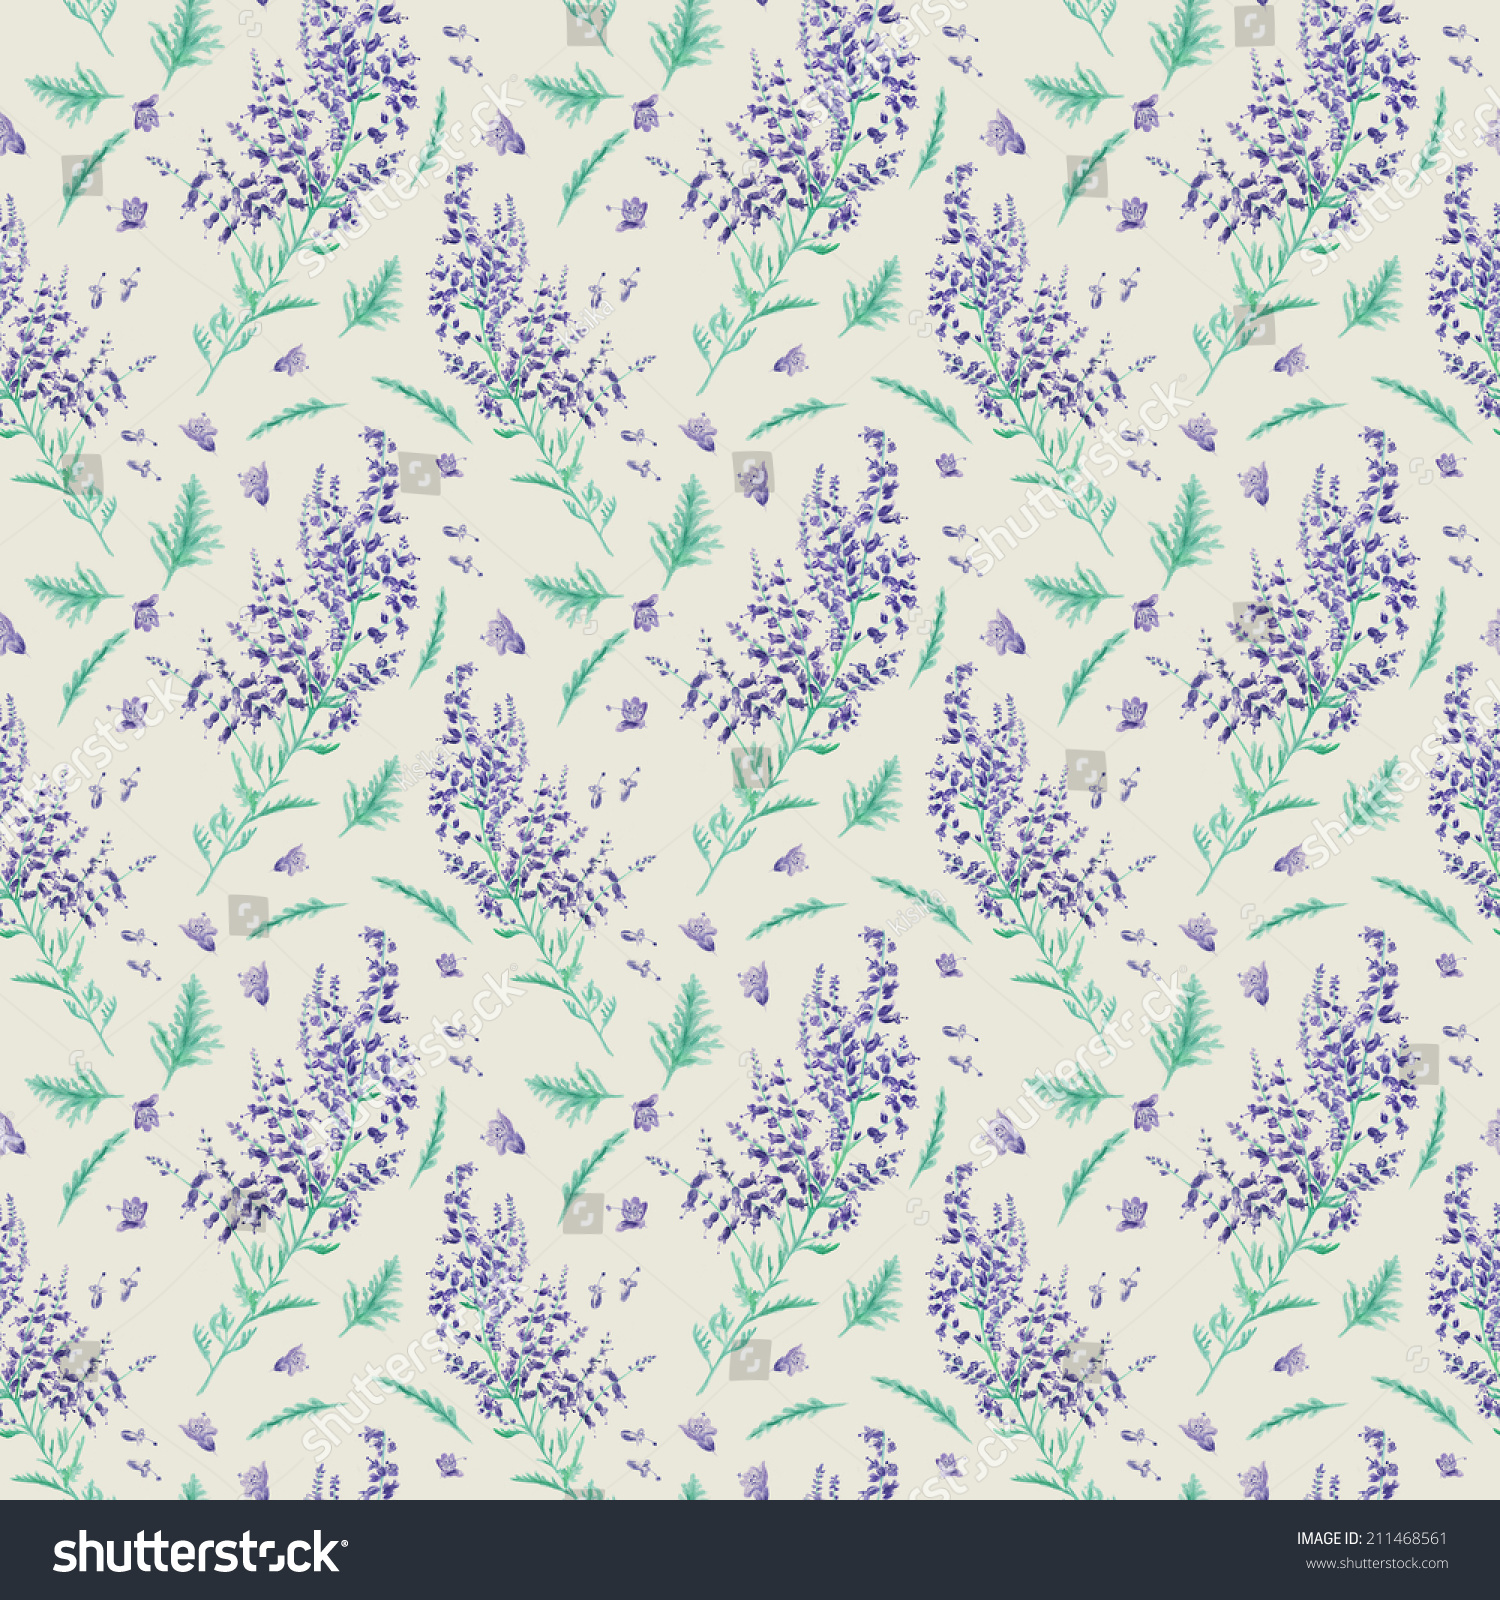 Background With Lavender Flowers And Leaves For Design. Provence Style ...